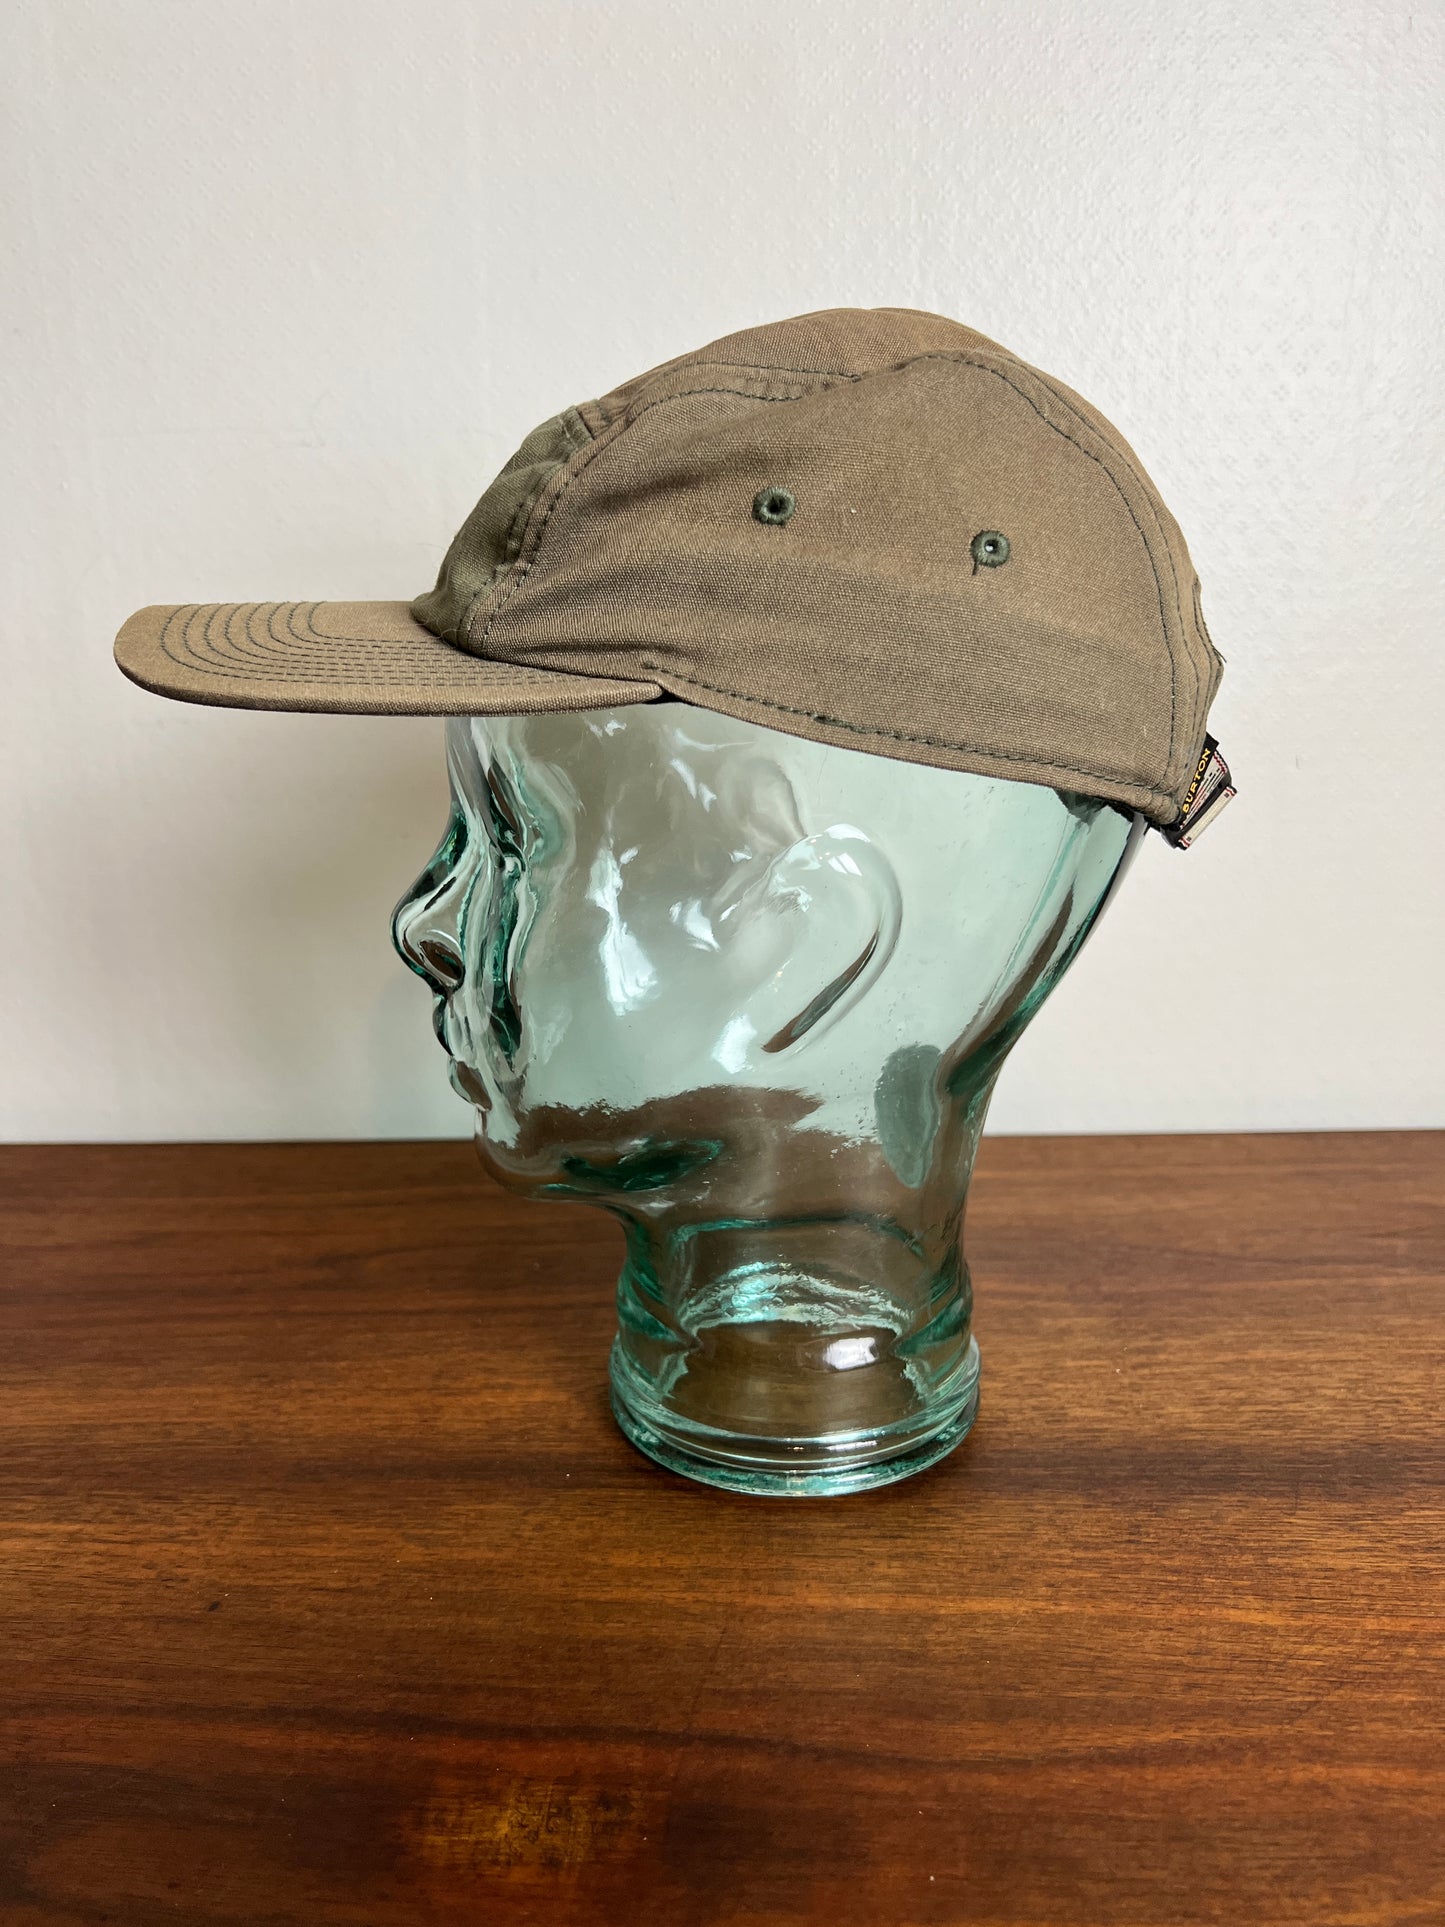 The Olive Green Cap